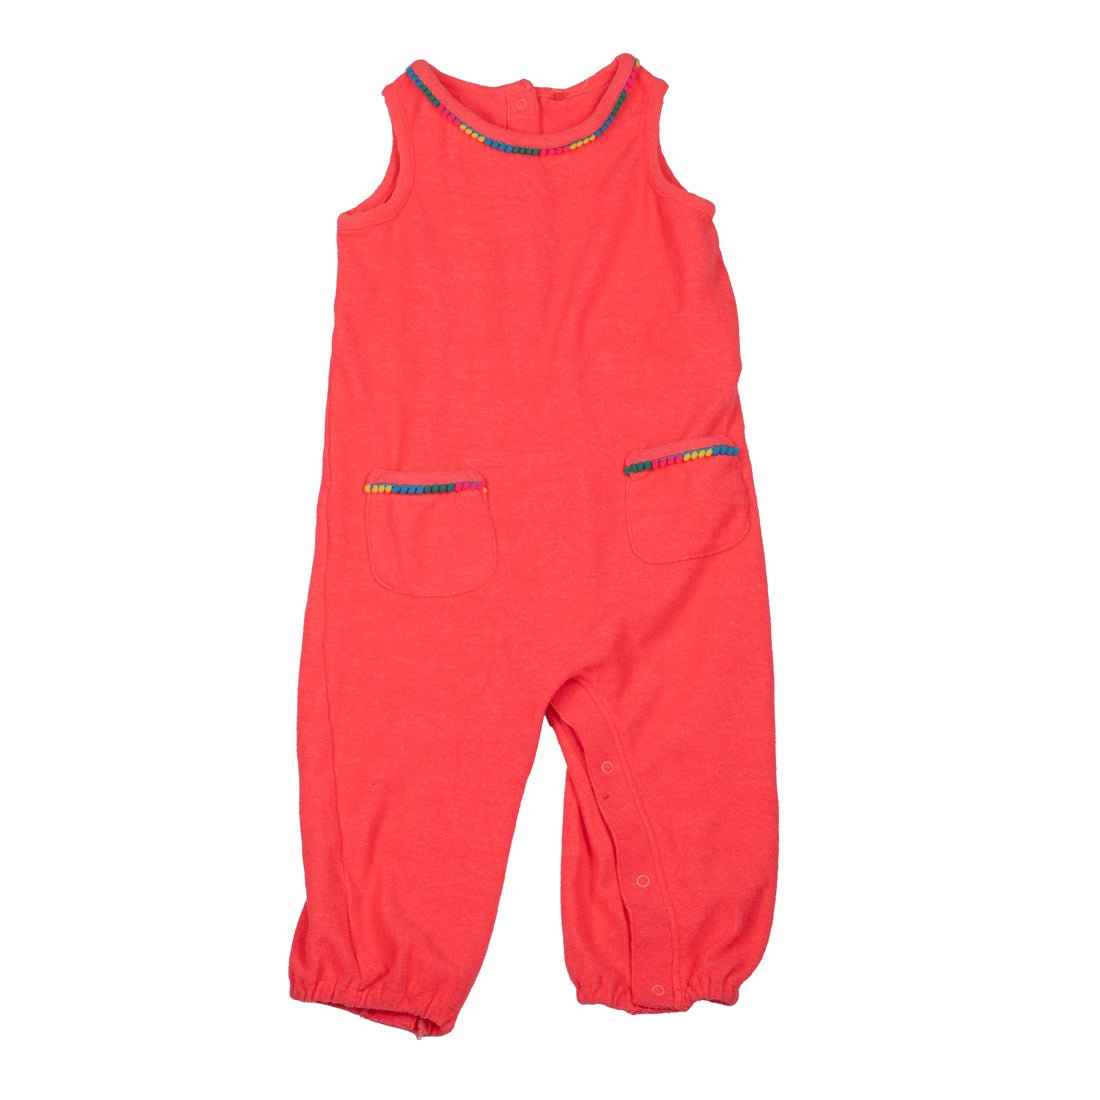 M&S Brand New Jumpsuit For Girls - mymadstore.com